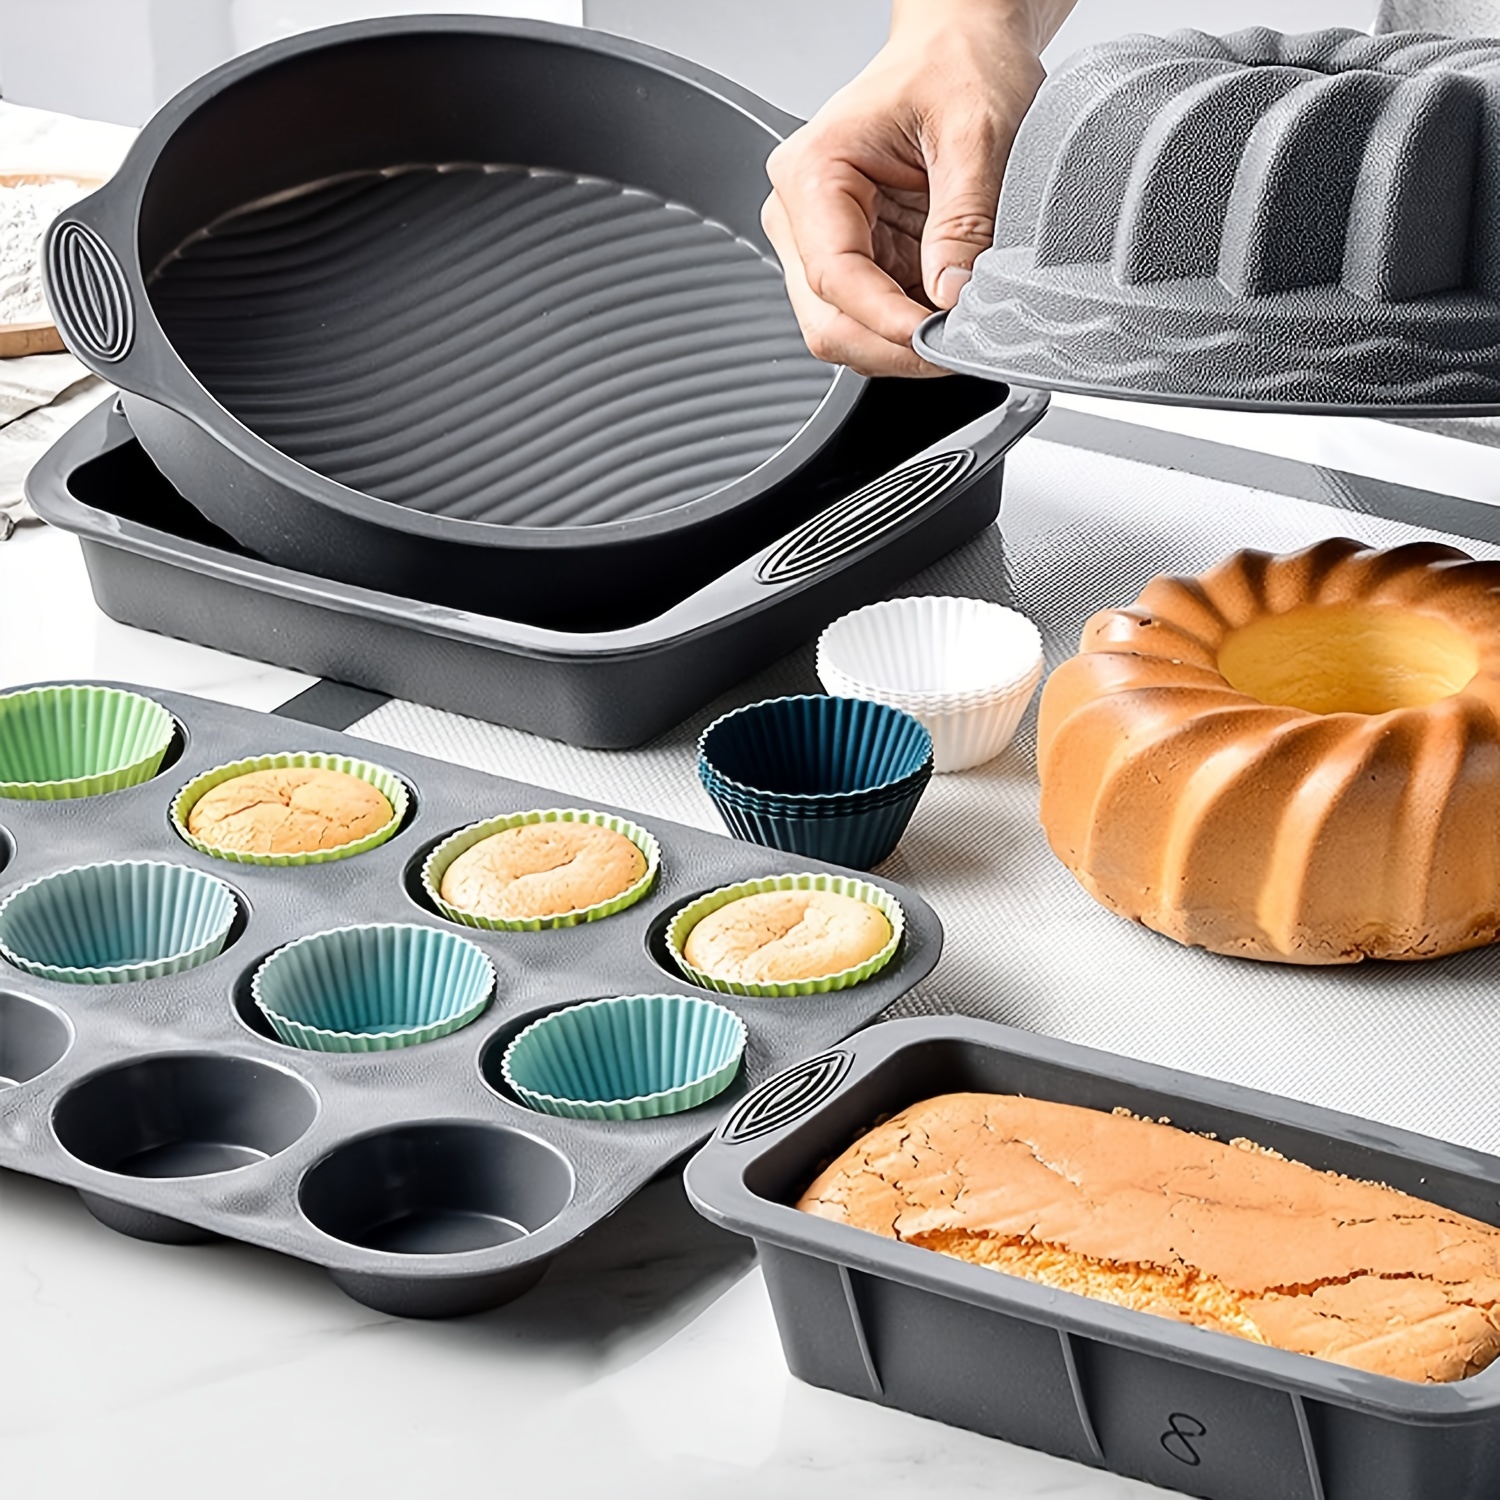 Silicone Bakeware & Tools - Wholesale Baking Supplies